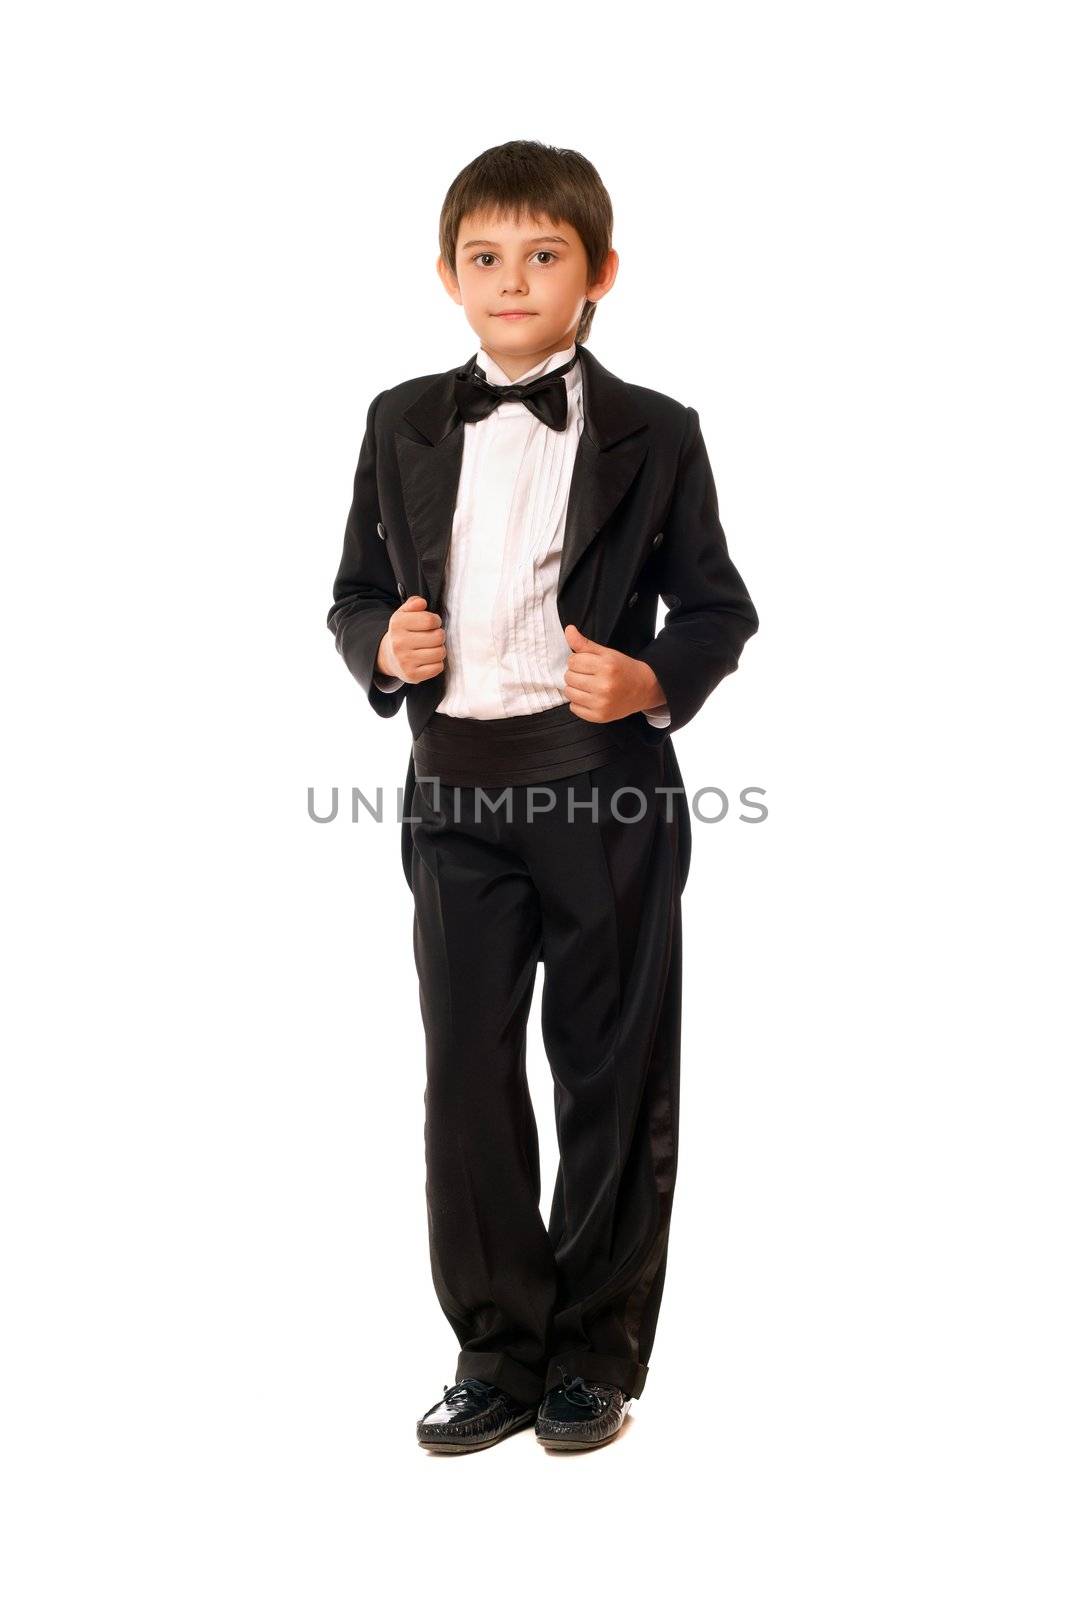 Handsome little boy in a tuxedo. Isolated on white